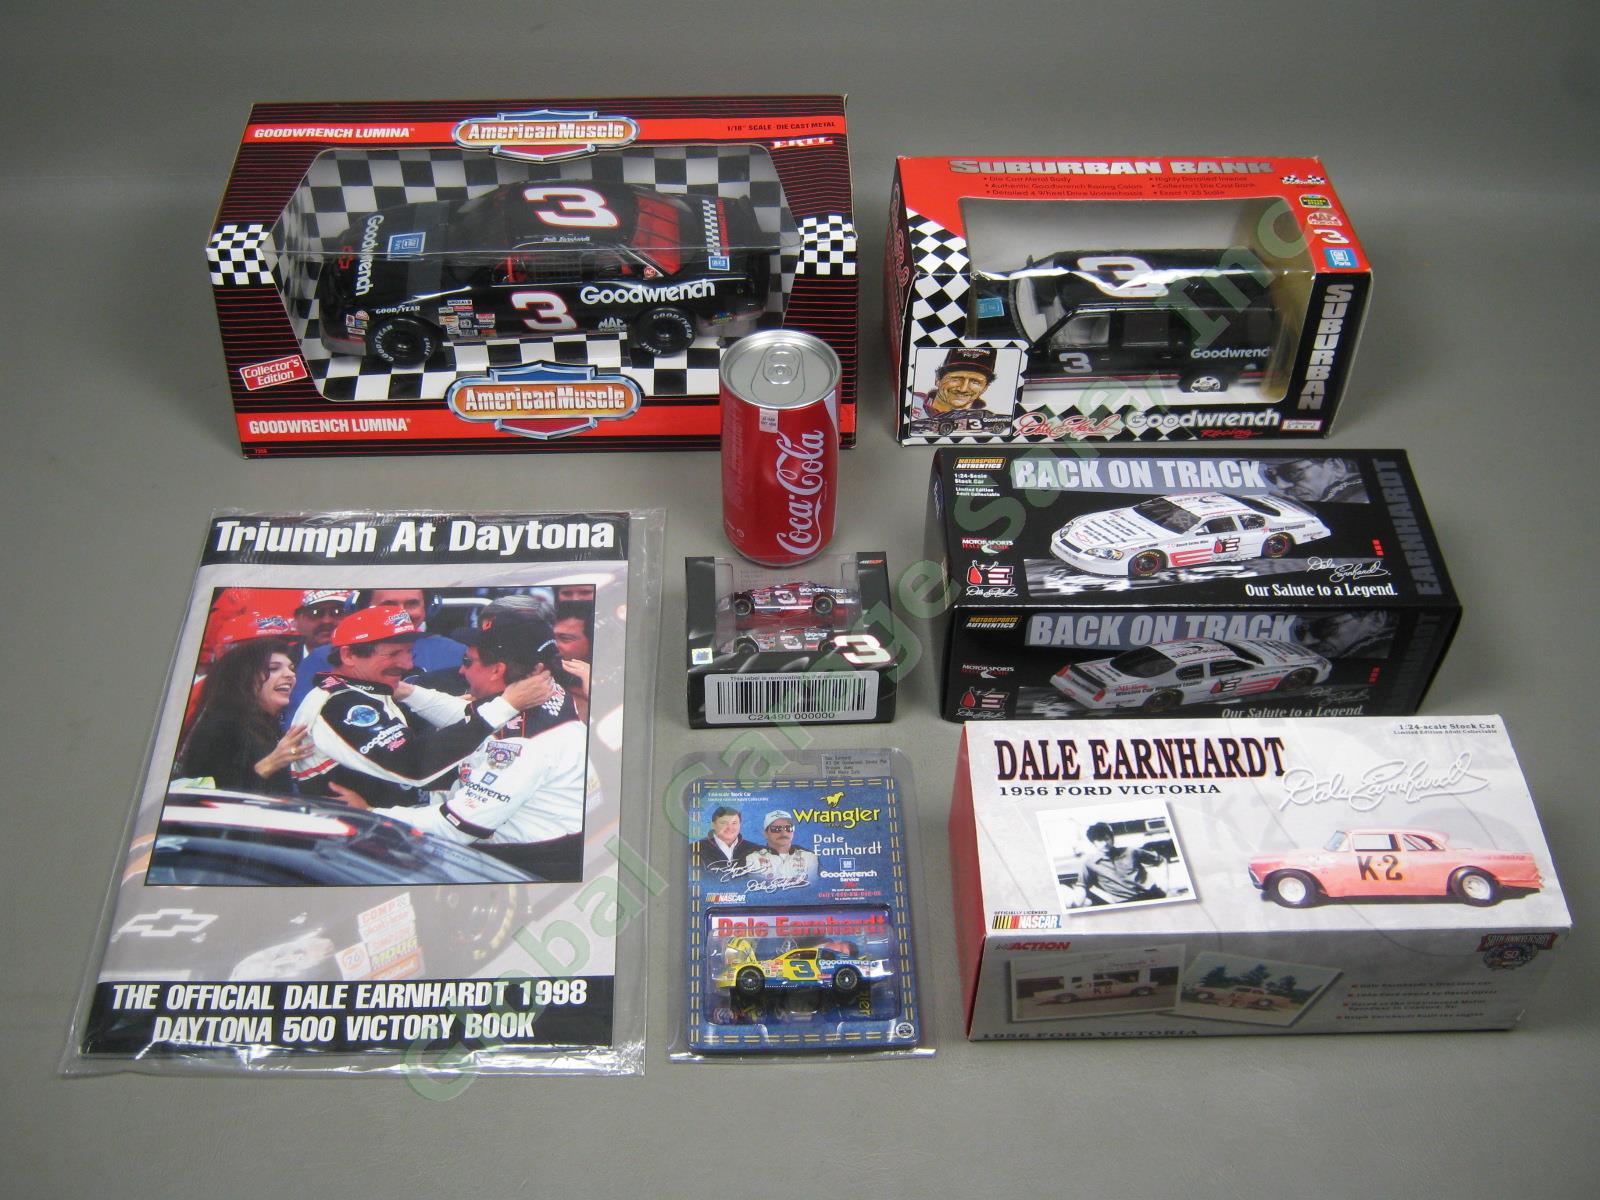 2 Dale Earnhardt 1:24 Diecast Car Banks Action 1956 Ford + Daytona Victory Book+